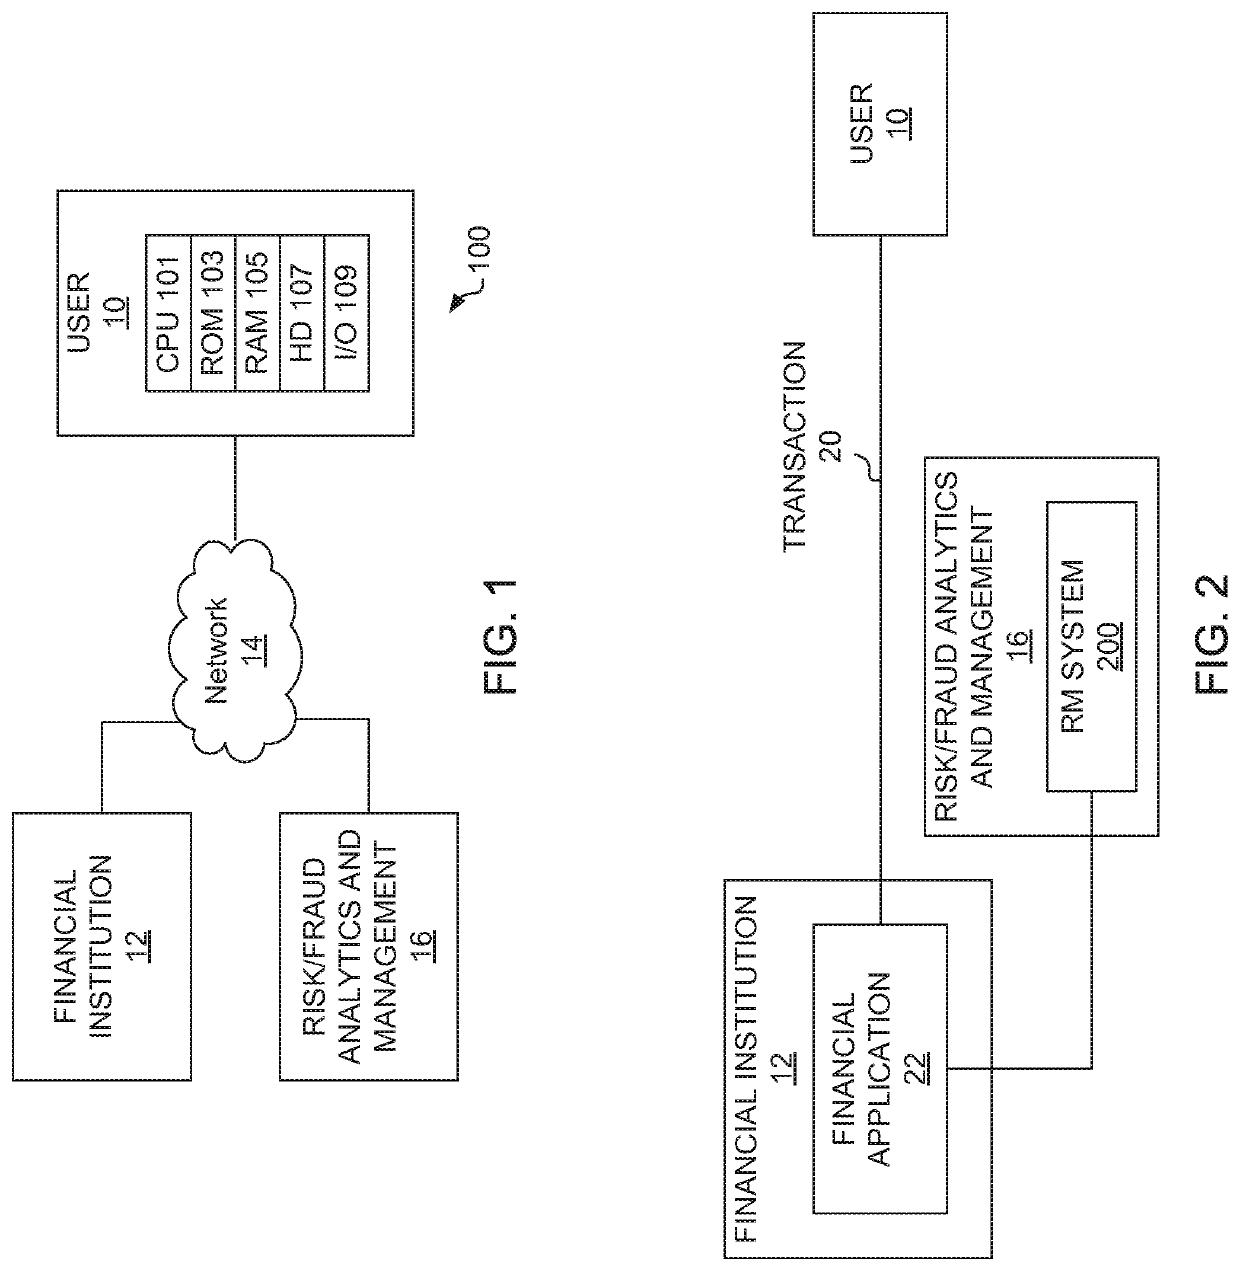 System and method for network security based on a user's computer network activity data